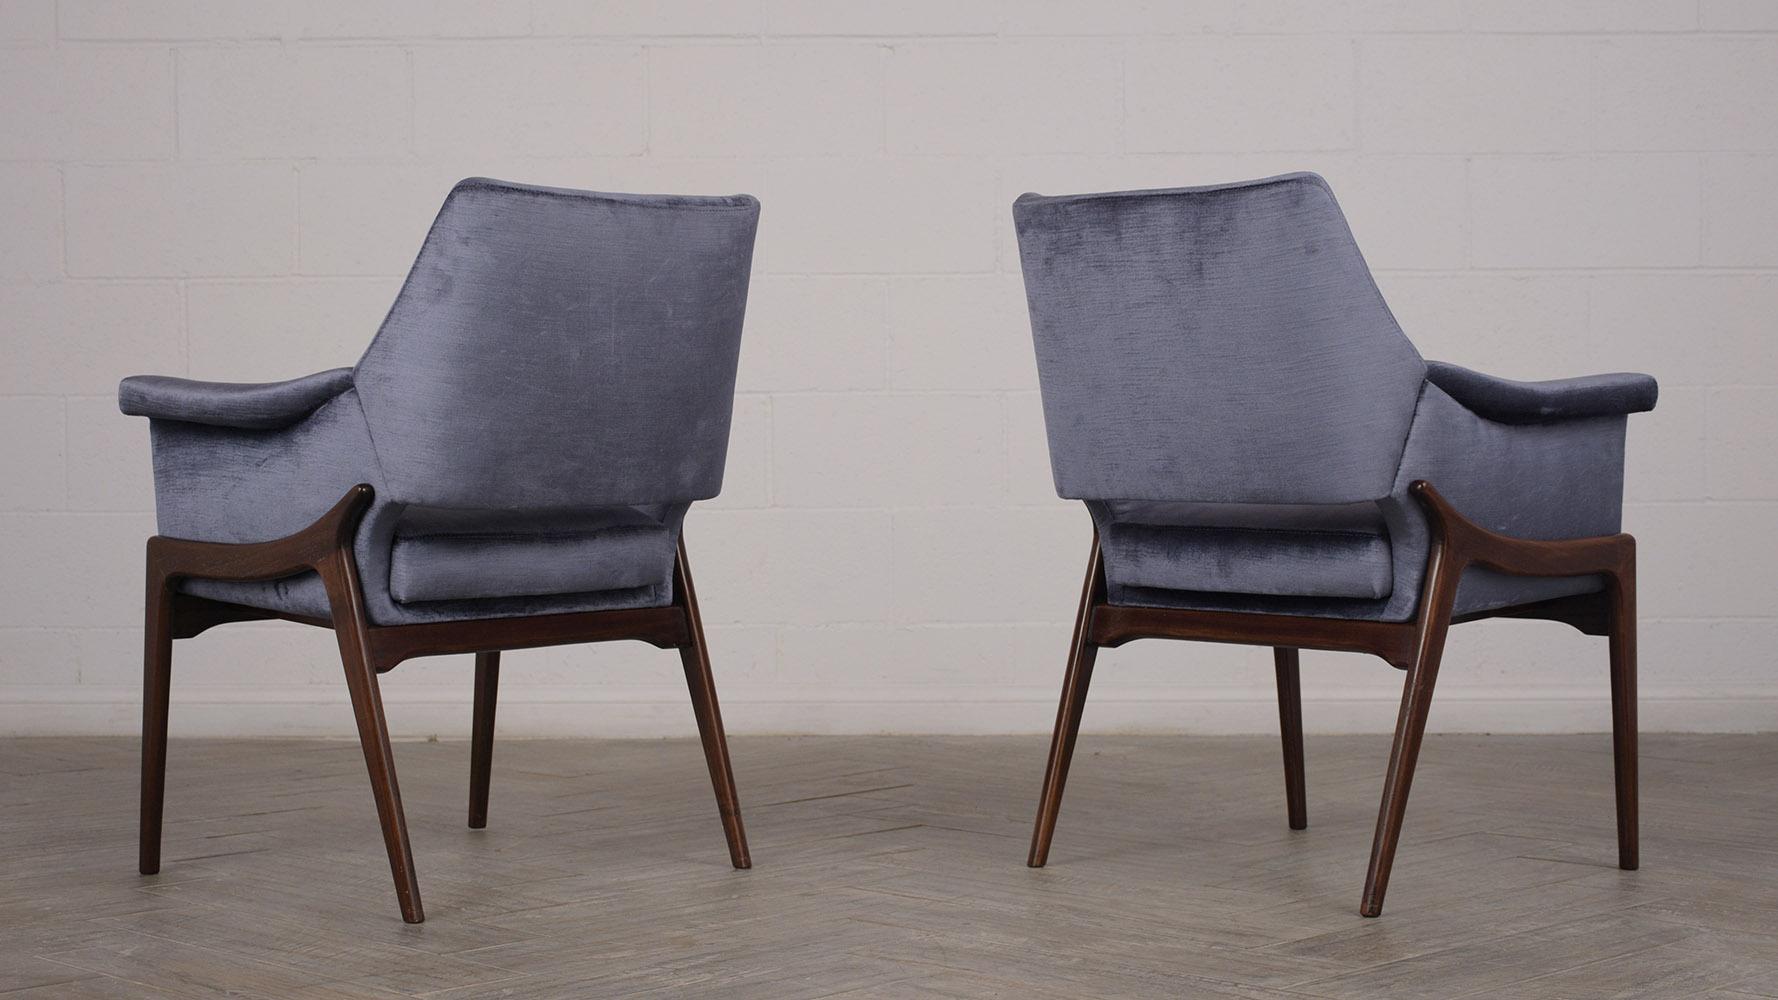 Mid-20th Century Pair of Modern Rosewood Chairs with Lacquered Finish